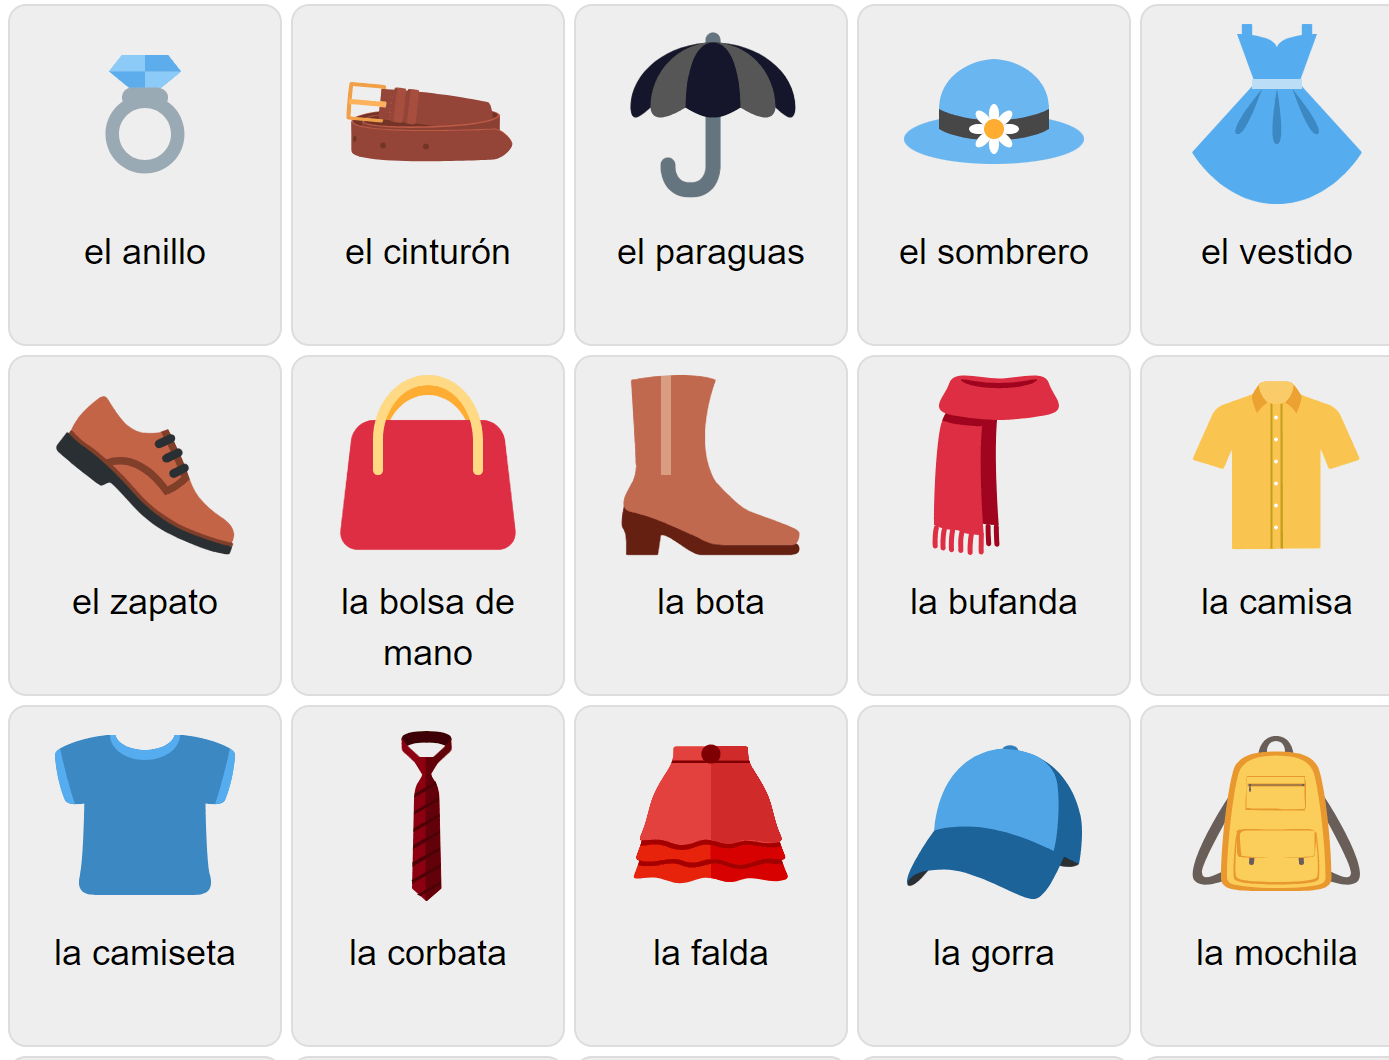 Clothes in Spanish